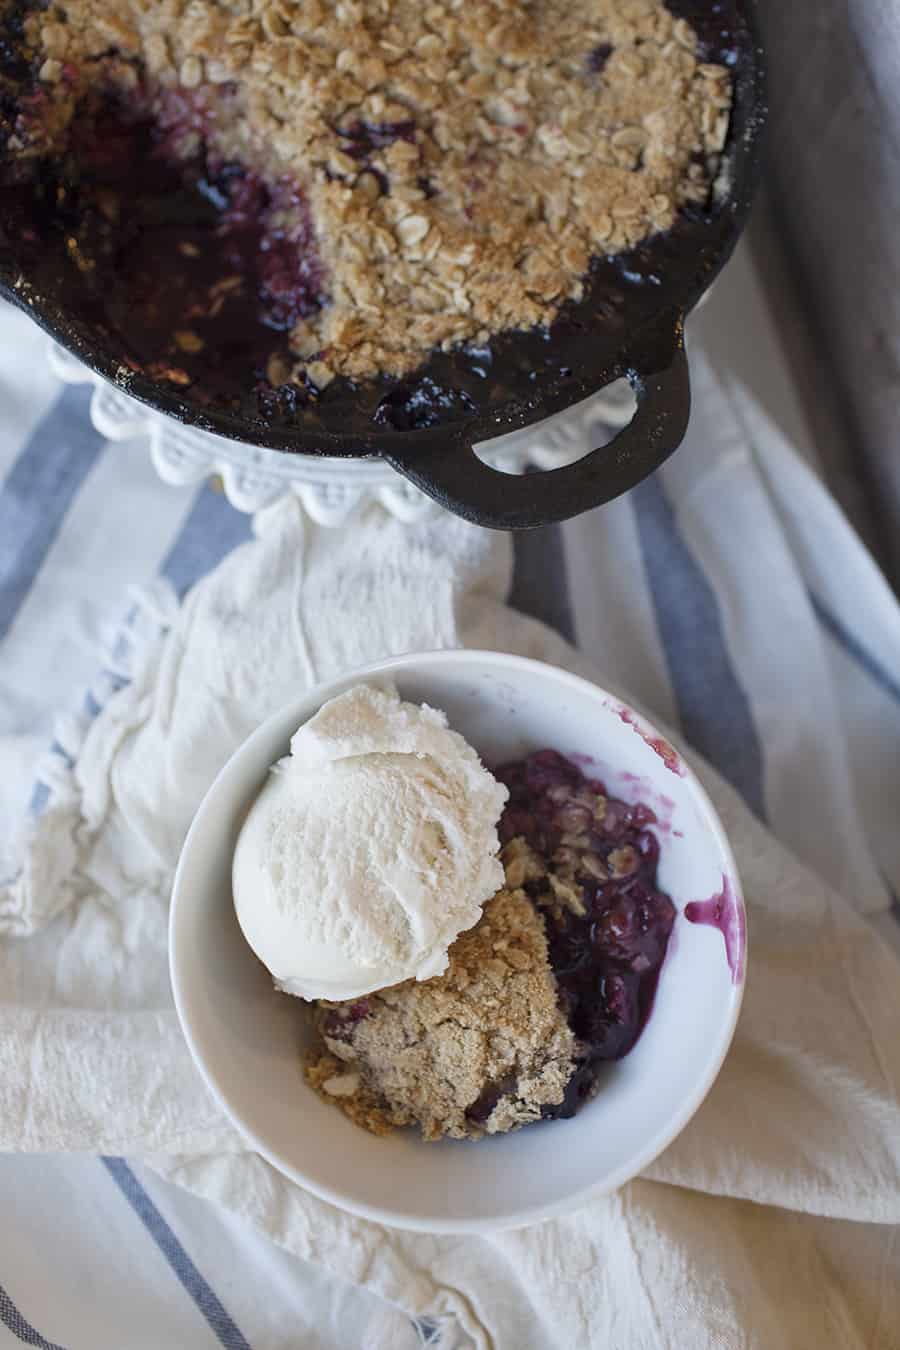 This cast iron mixed berry crisp is the perfect quick dessert! You can easily sub out the fruit for whatever you have on hand for a delicious after-dinner treat!